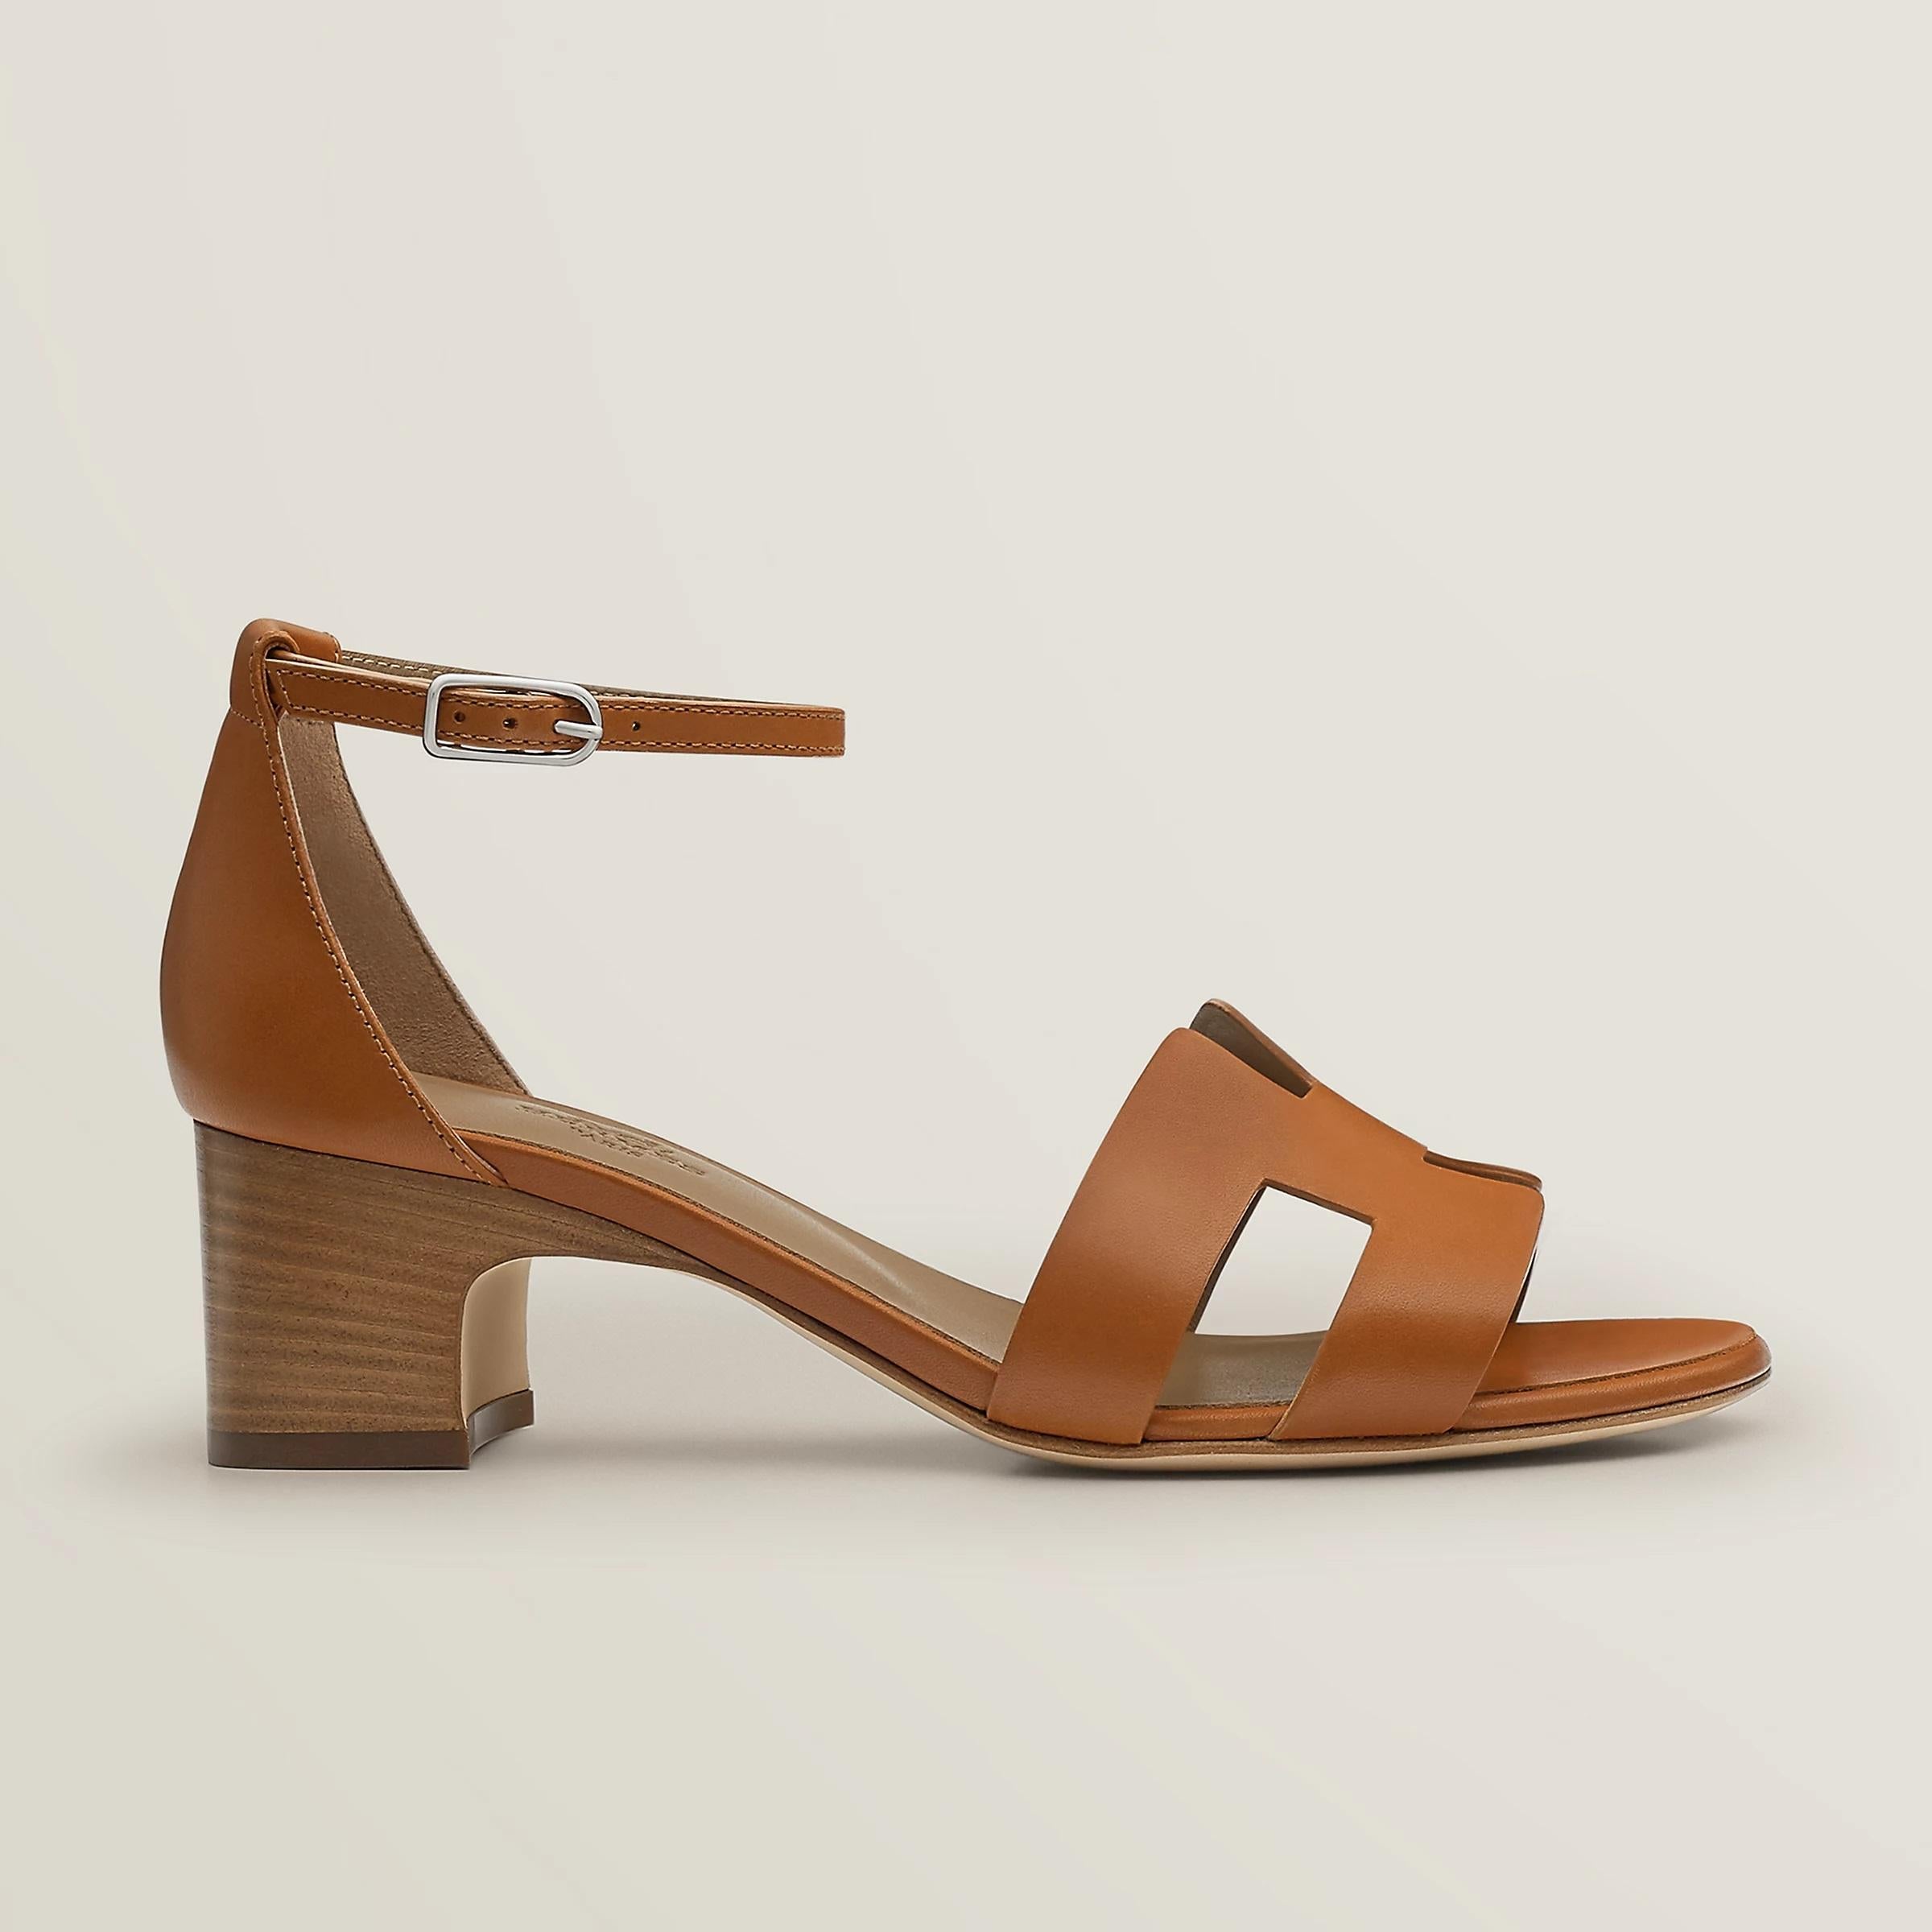 Size 38.5
Heeled sandals in Heritage calfskin, “H” cutout for a timeless and elegant style